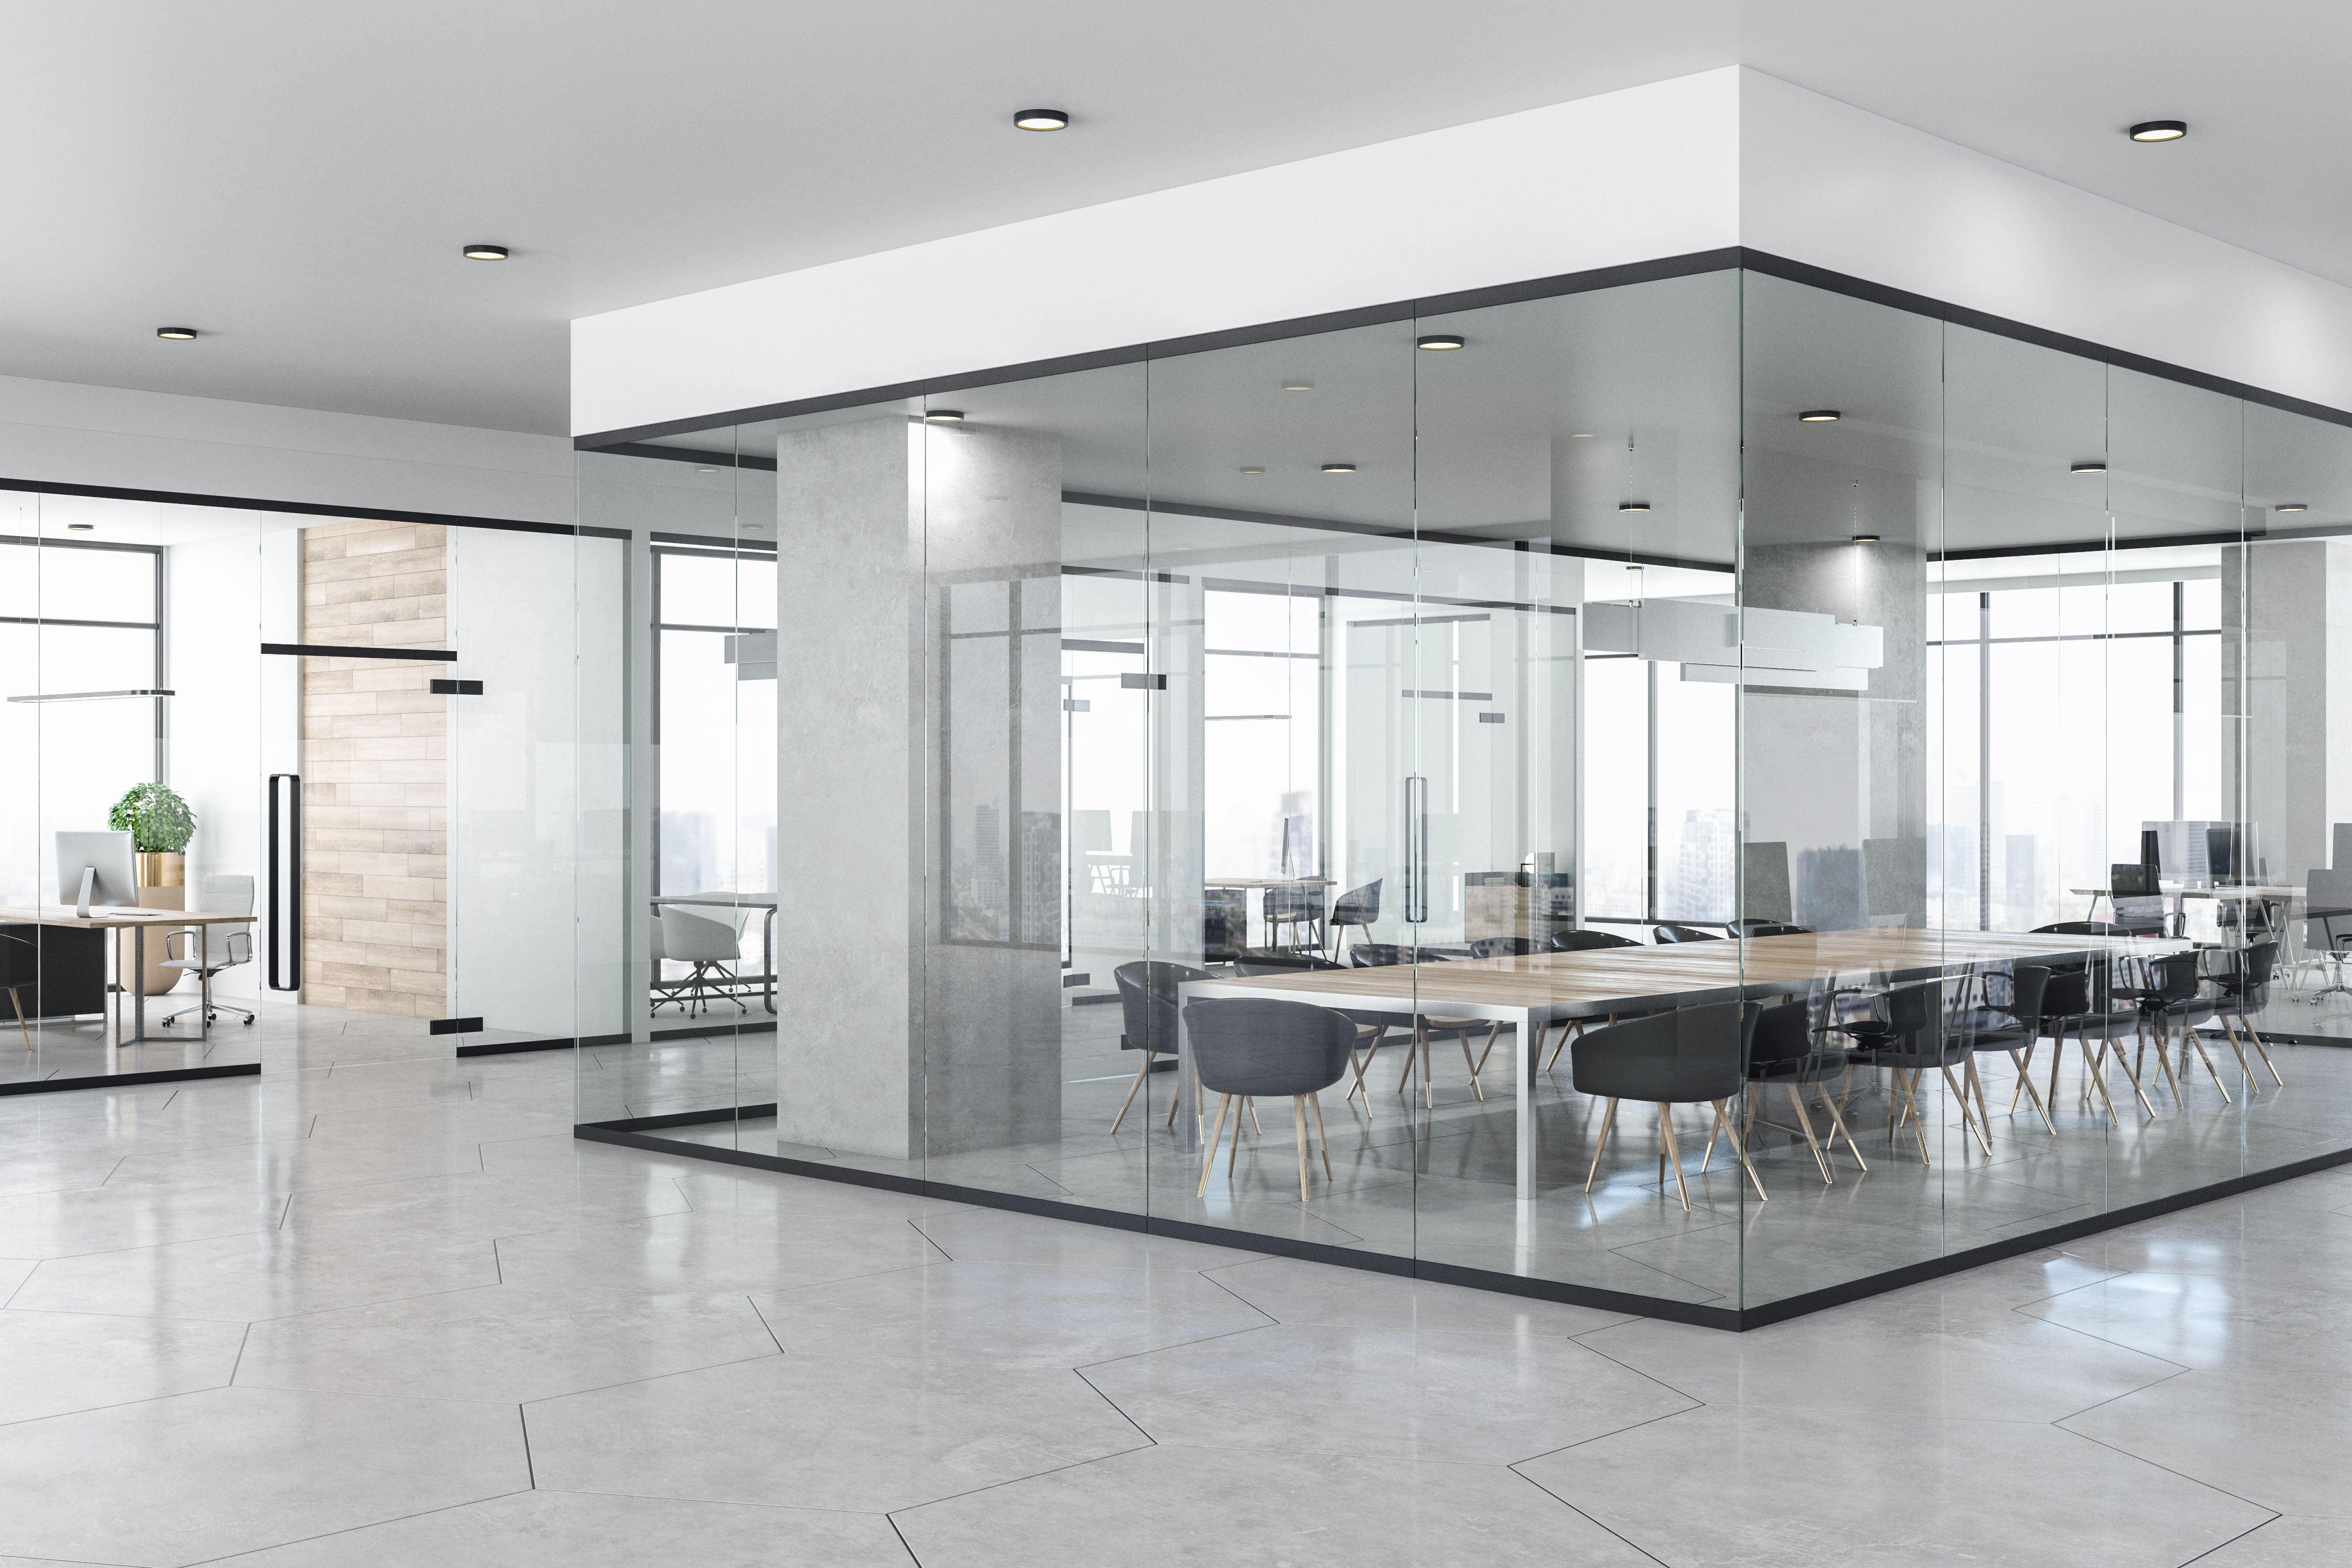 A contemporary office with a meeting room in the middle constructed with interior glass walls